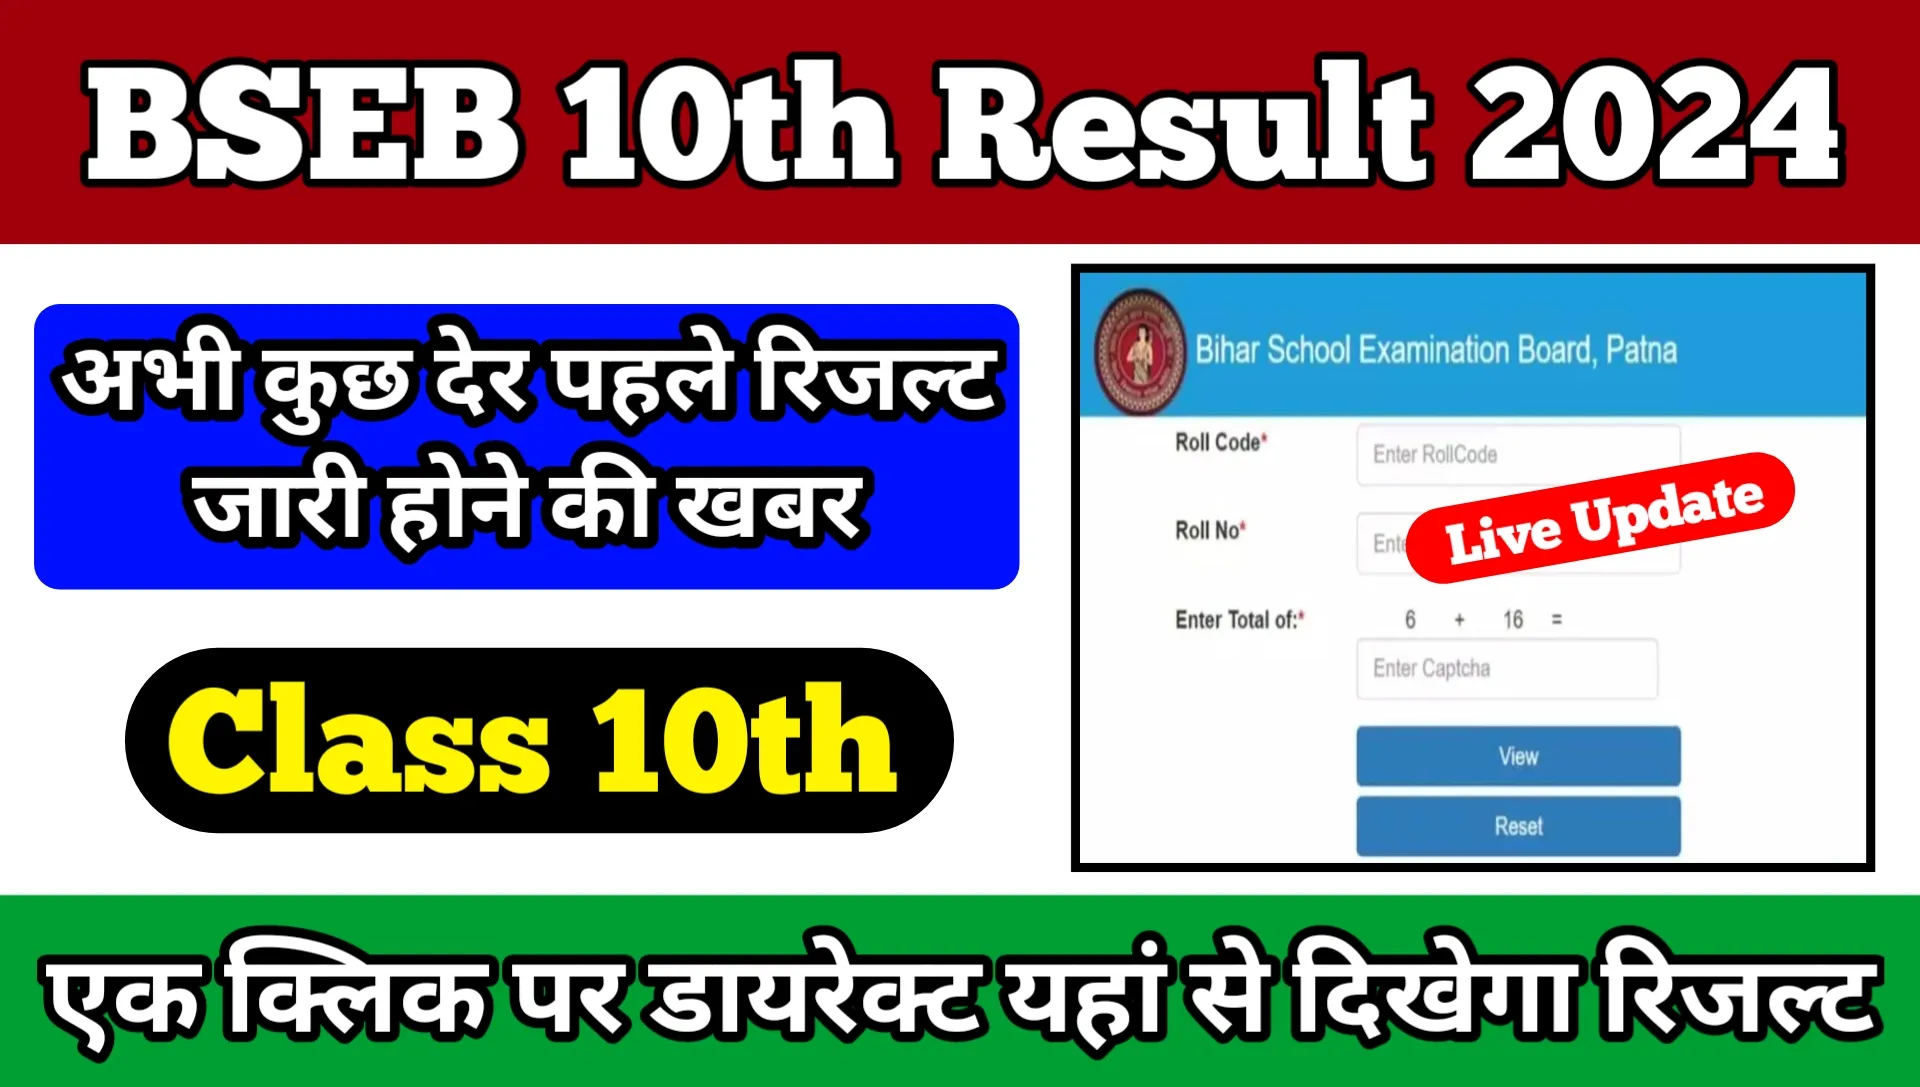 BSEB 10th Result 2024 Release Date